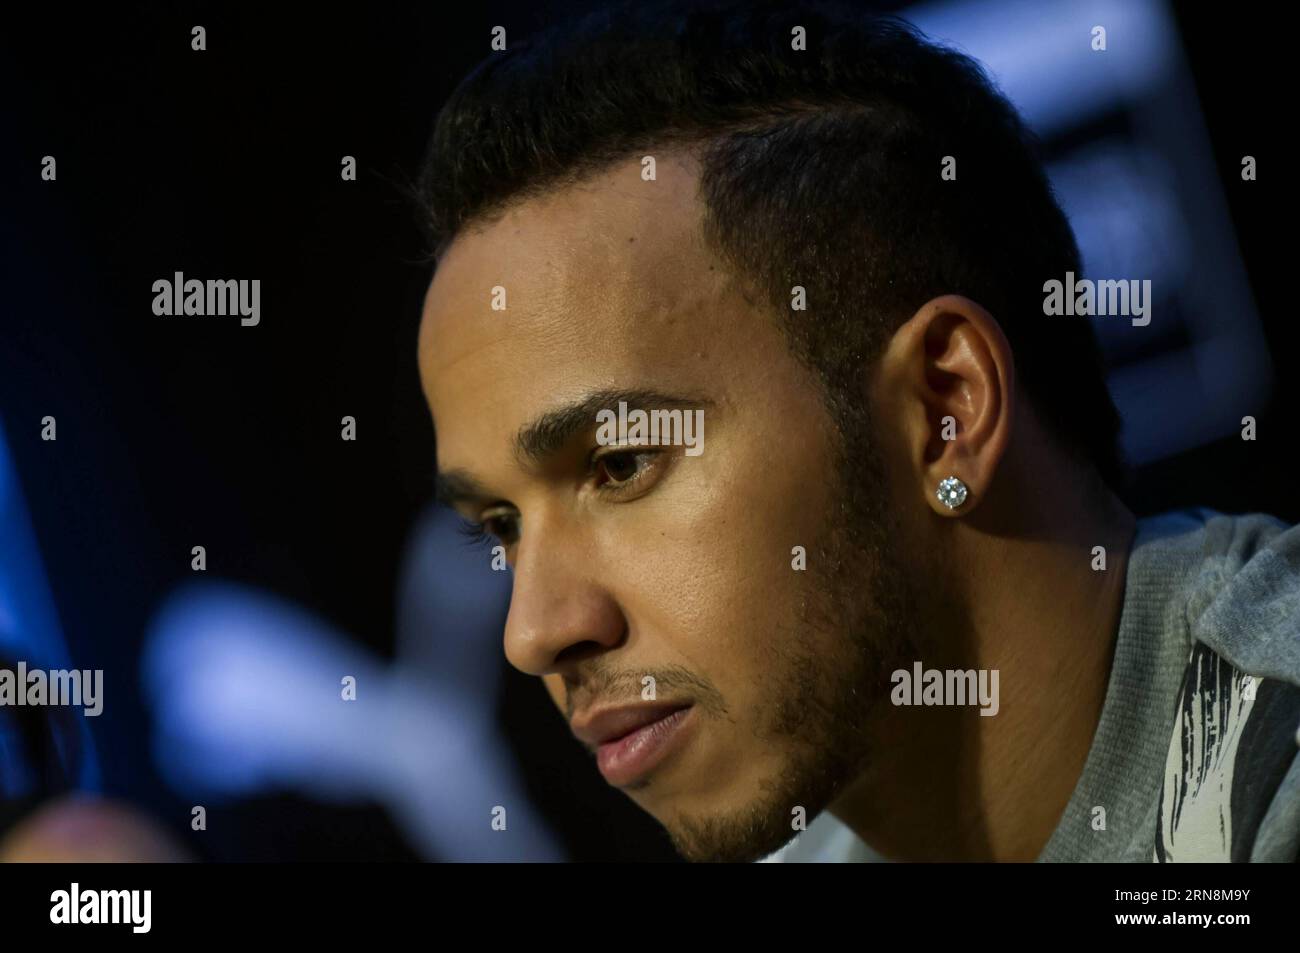 (151029) -- MEXICO CITY,  - British driver Lewis Hamilton of Mercedes team, reacts during his visit to Arena Mexico, prior to the F1 Mexican Grand Prix, in Mexico City, capital of Mexico, on Oct. 28, 2015. According to local press, Lewis Hamilton visited on Wednesday the Arena Mexico, where he watched a wrestling exhibition and played a match of table football at the ring with Mexican soccer player Oribe Peralta. The F1 Mexican Grand Prix will be held from Oct. 30 to Nov. 1, in Mexico City. ) (SP)MEXICO-MEXICO CITY-AUTOMOBILE-F1 OSCARxRAMIREZ PUBLICATIONxNOTxINxCHN   Mexico City British Driver Stock Photo